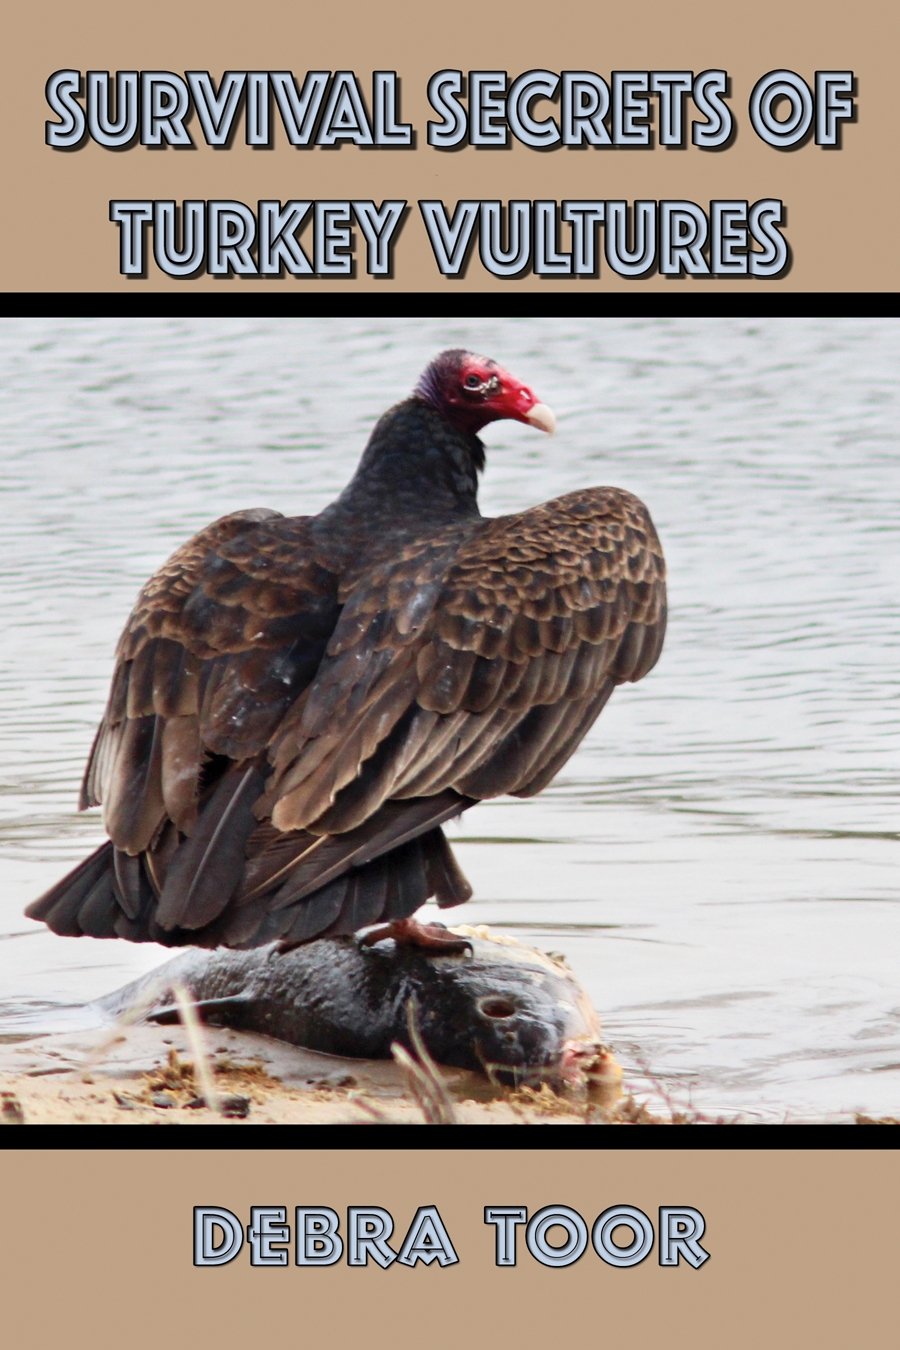 Guest Post: The Vultures Are Coming